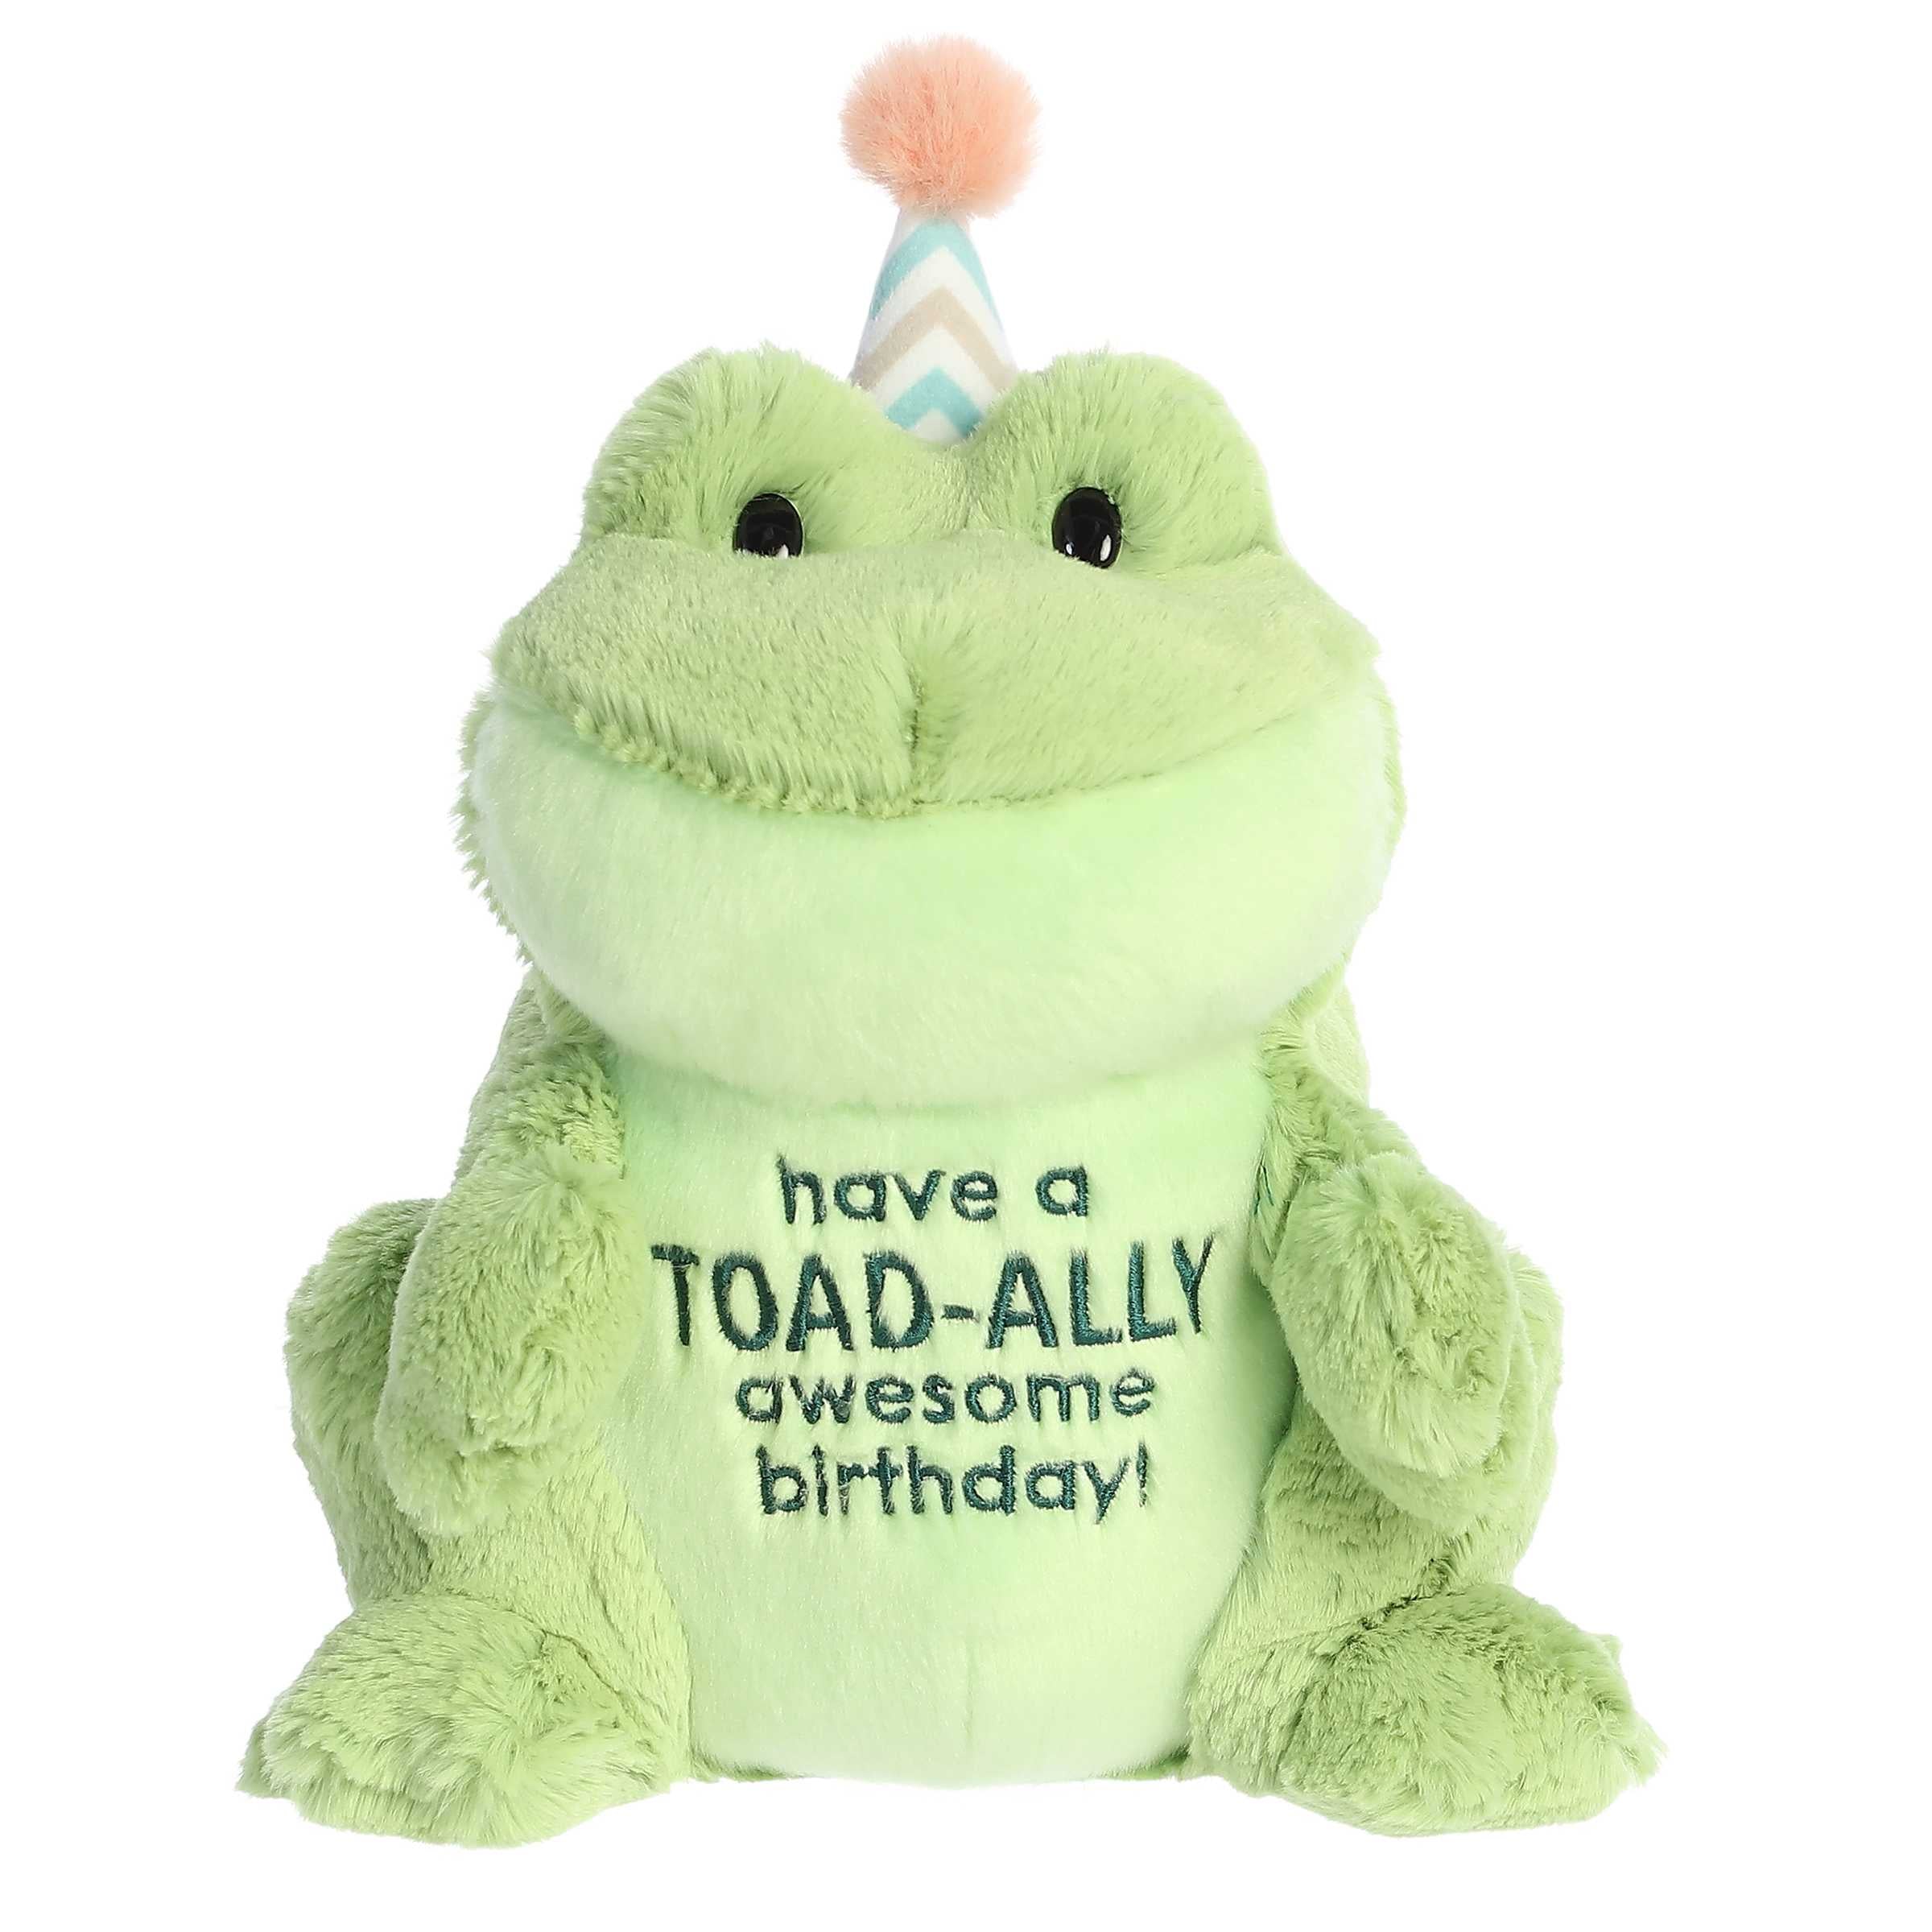 Cute frog plush toy with a green body, wearing a birthday hat, and "Have a TOAD-ALLY awesome birthday!" pun written across